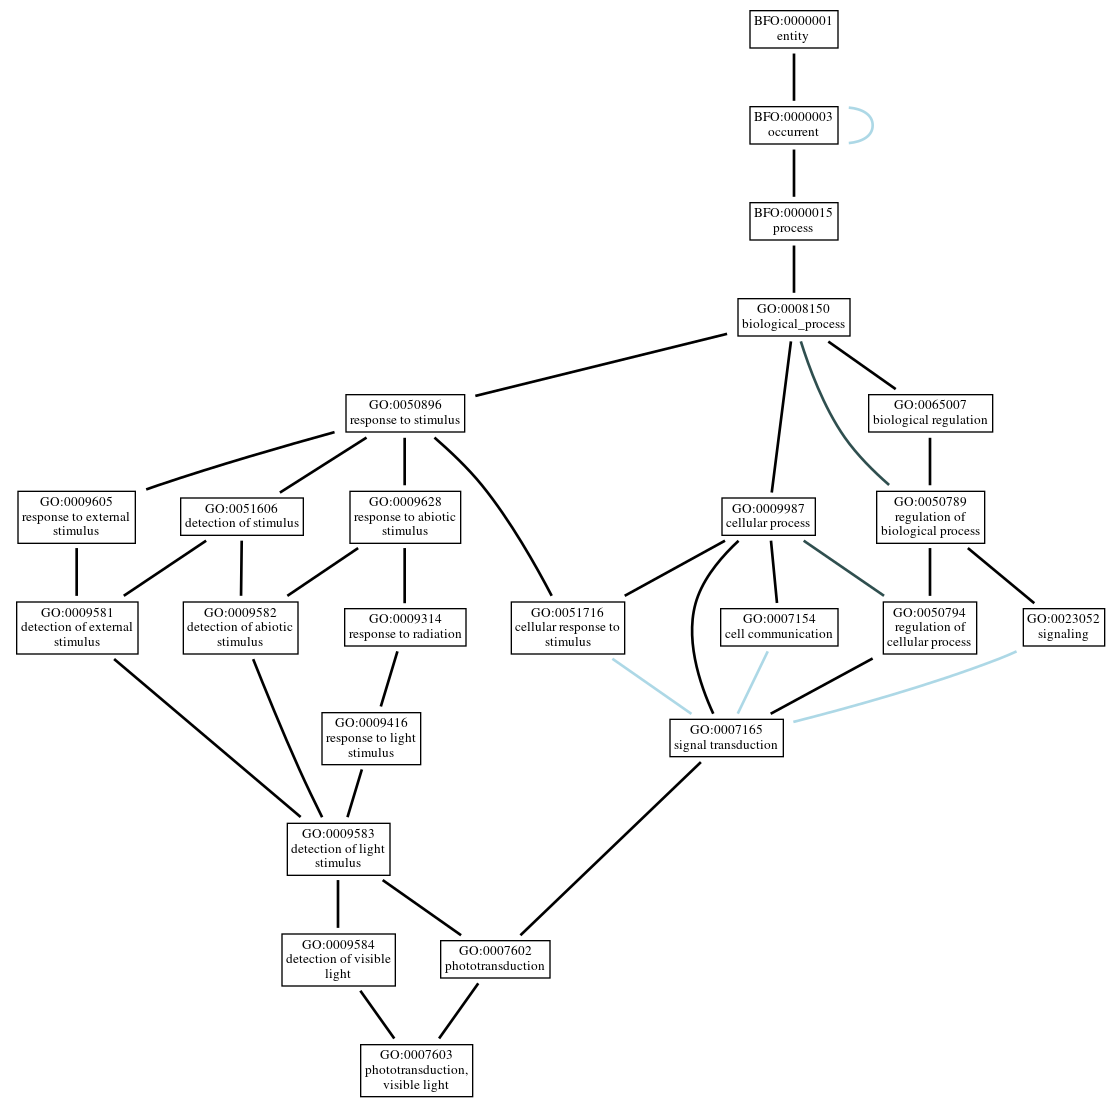 Graph of GO:0007603